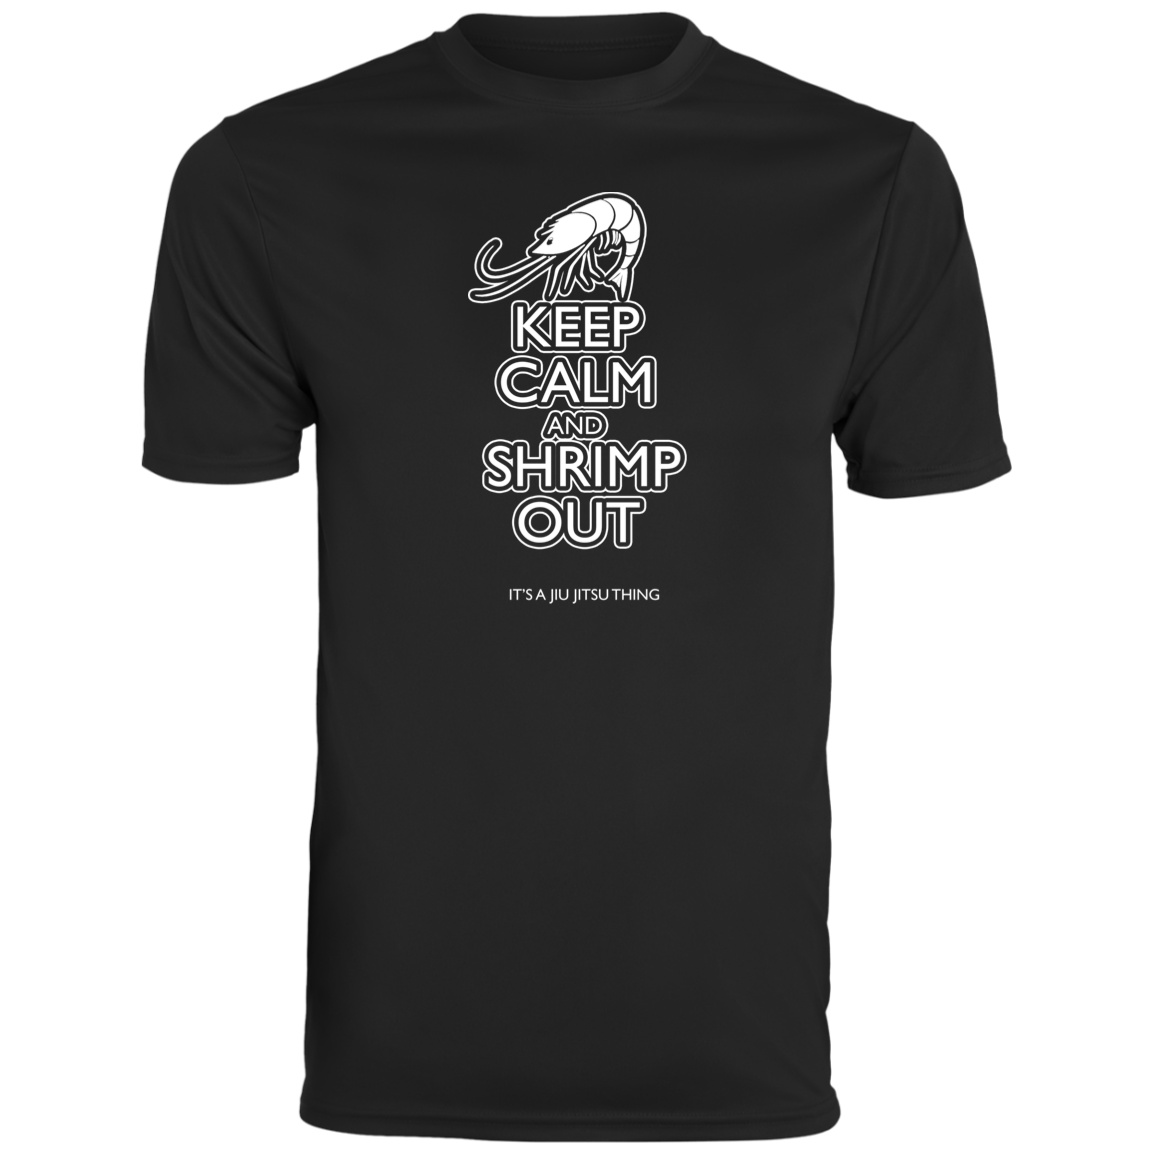 Artichoke Fight Gear Custom Design #12. Keep Calm and Shrimp Out. Youth Moisture-Wicking Tee